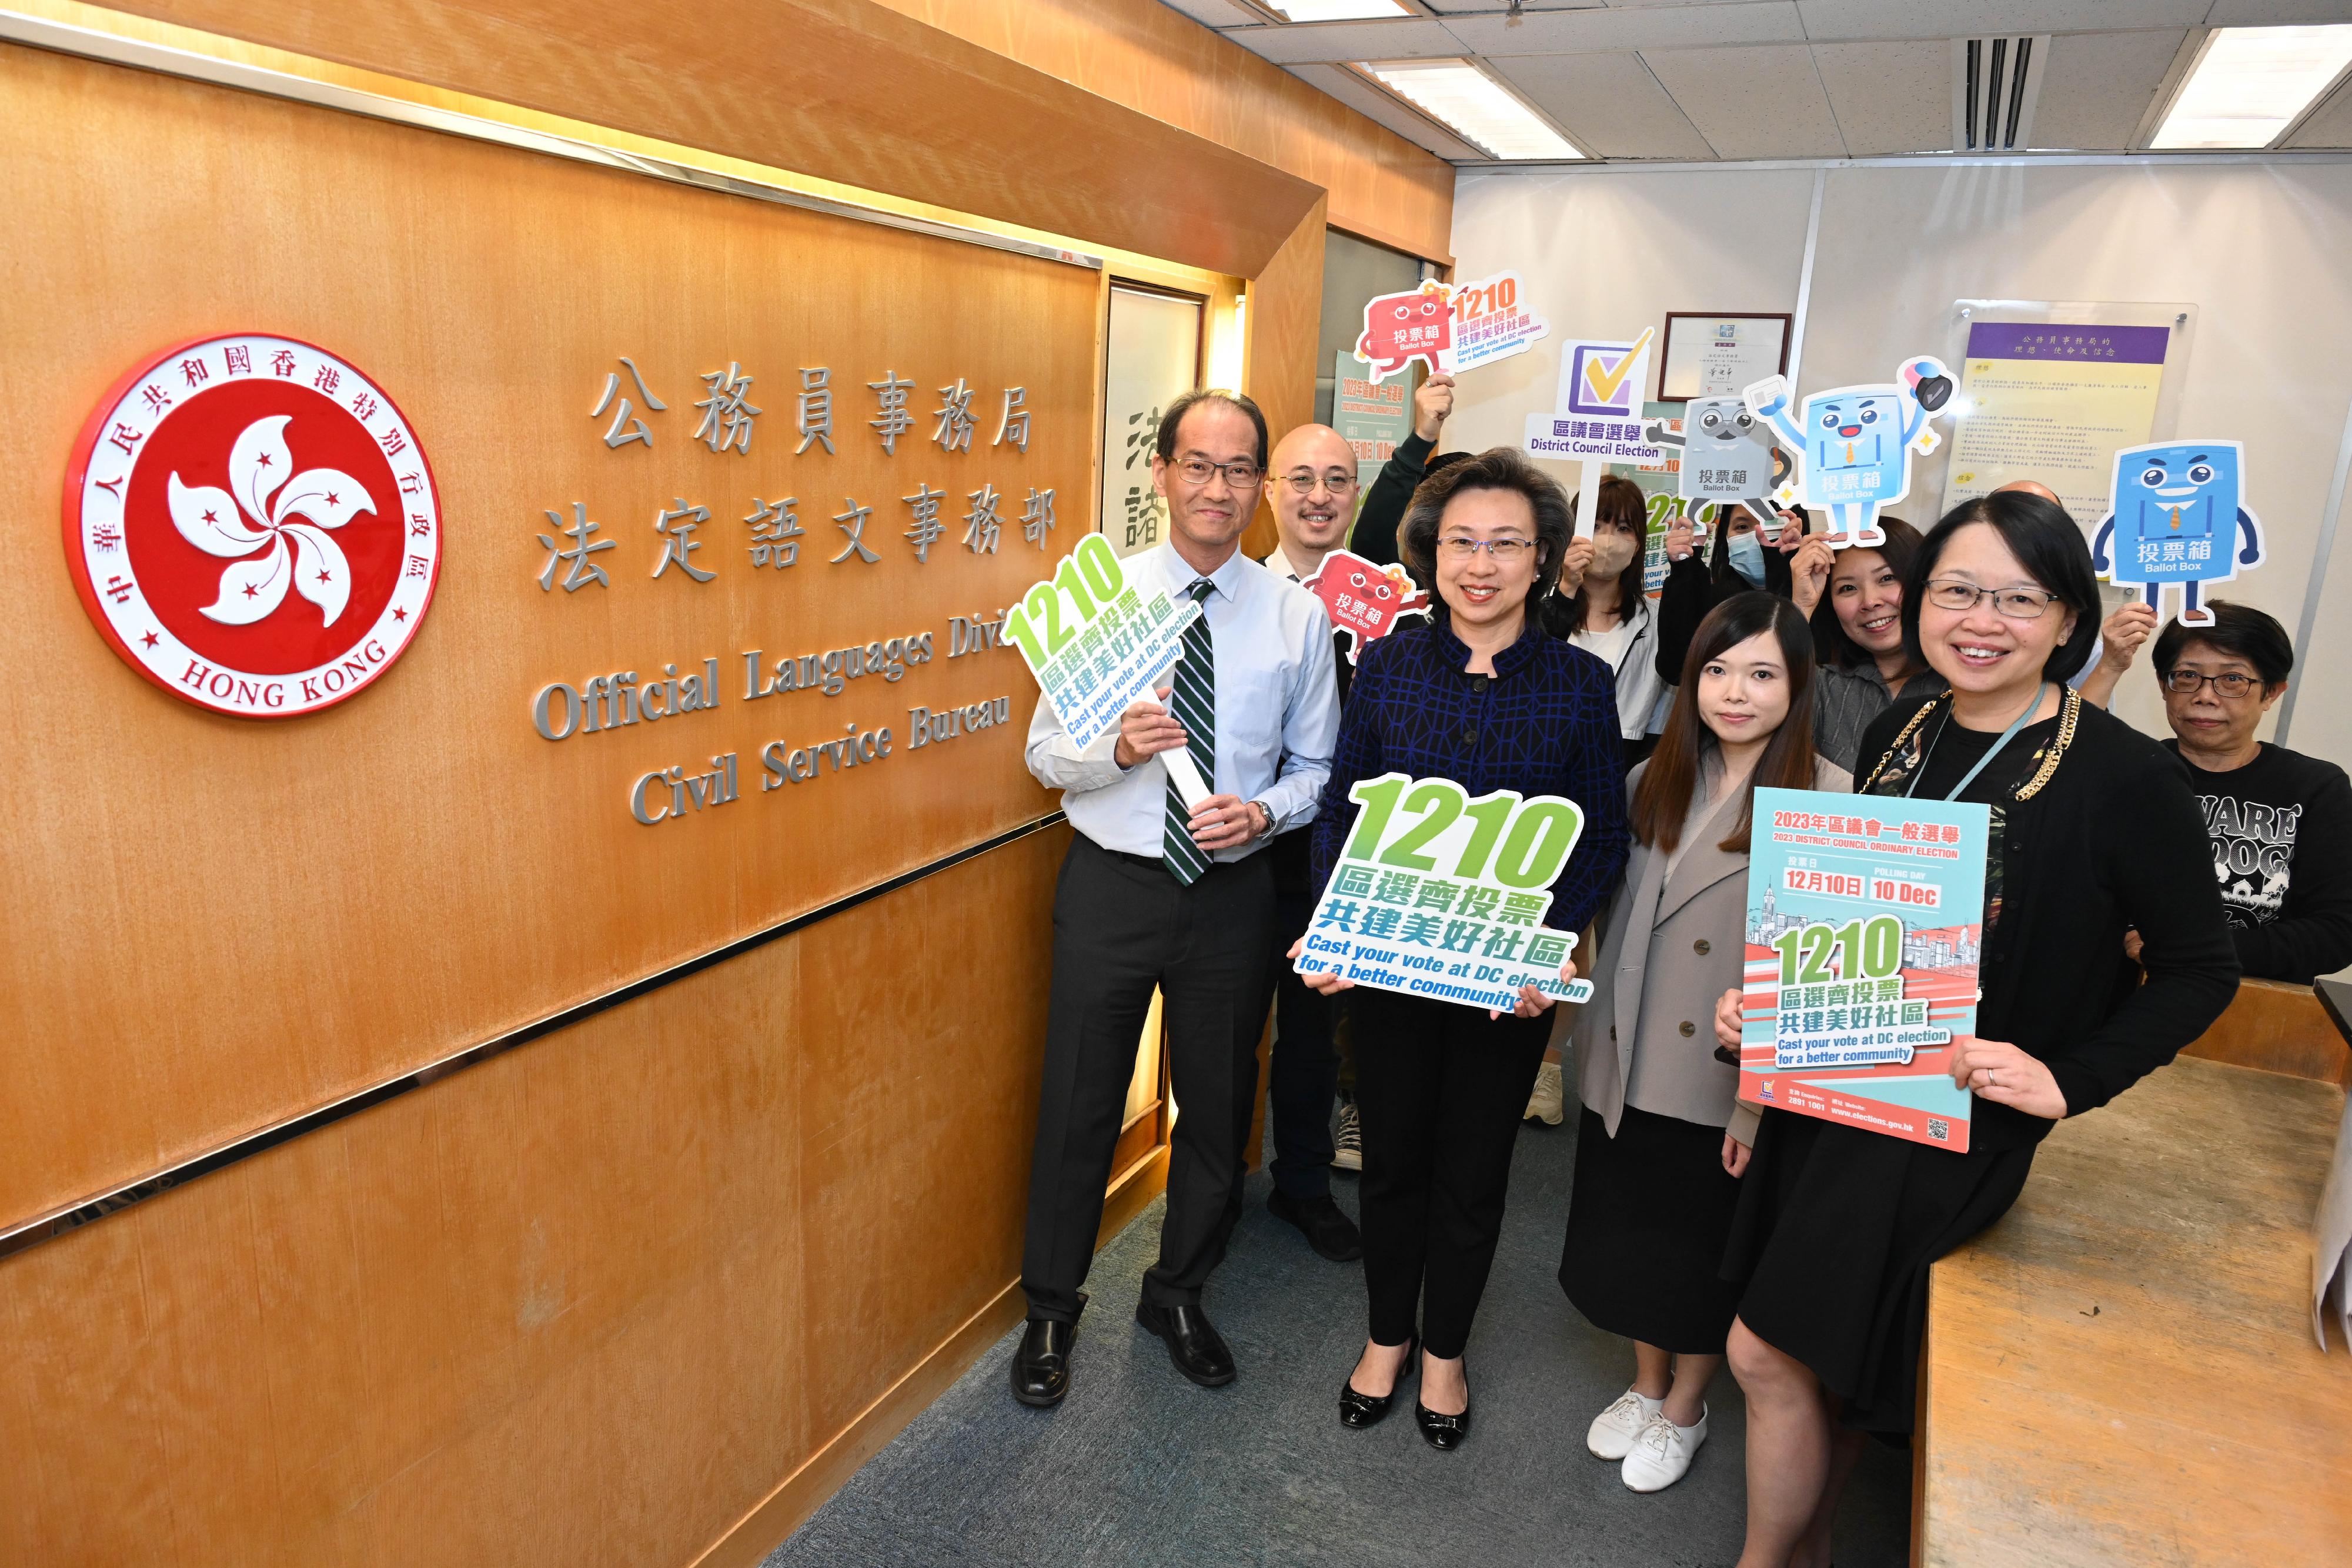 With only three days to go before the District Council (DC) election, the Secretary for the Civil Service, Mrs Ingrid Yeung, distributed promotional leaflets on the DC electionto colleagues at the Official Languages Division of the Civil Service Bureau (CSB) today (December 7) to encourage them to cast their votes with their families and friends on December 10. Photo shows Mrs Yeung (front row, second left); Deputy Secretary for the Civil Service Mrs Angelina Cheung (front row, first right); and the Principal Official Languages Officer of the CSB, Mr Tin Kai-yin (front row, first left), with colleagues to express support for the DC election and voting together.